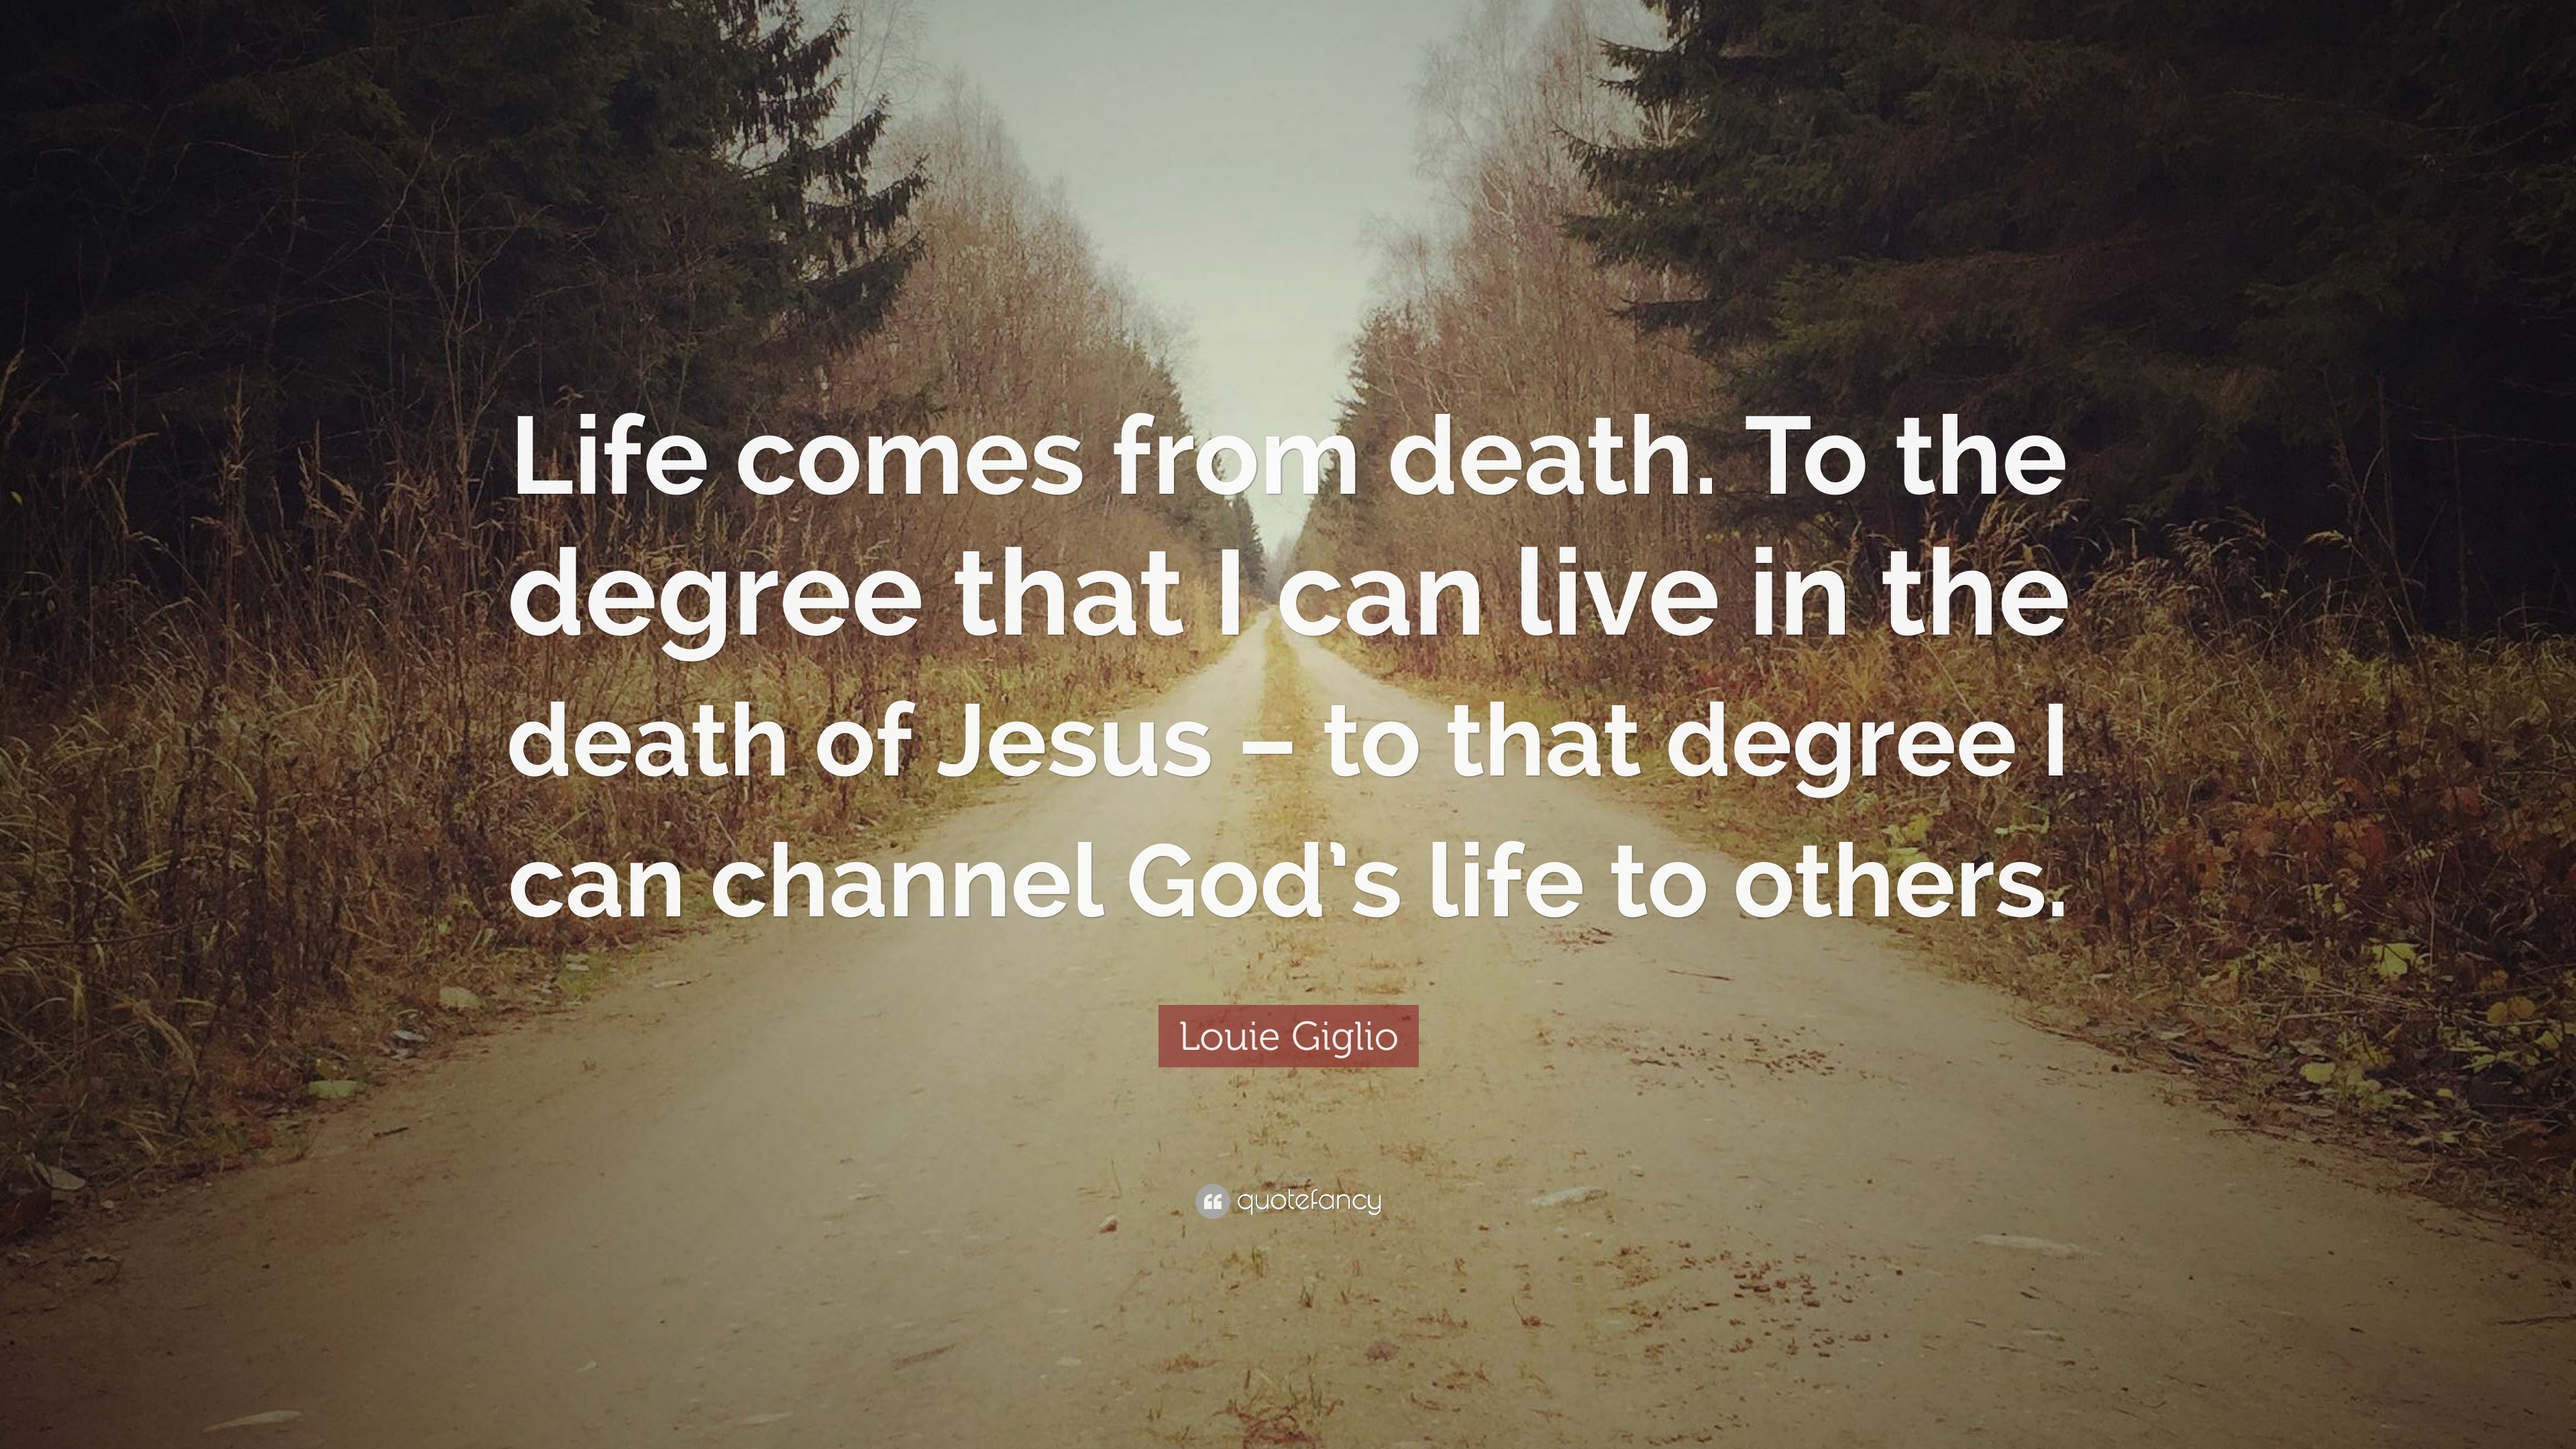 Louie Giglio Quote “Life es from To the degree that I can